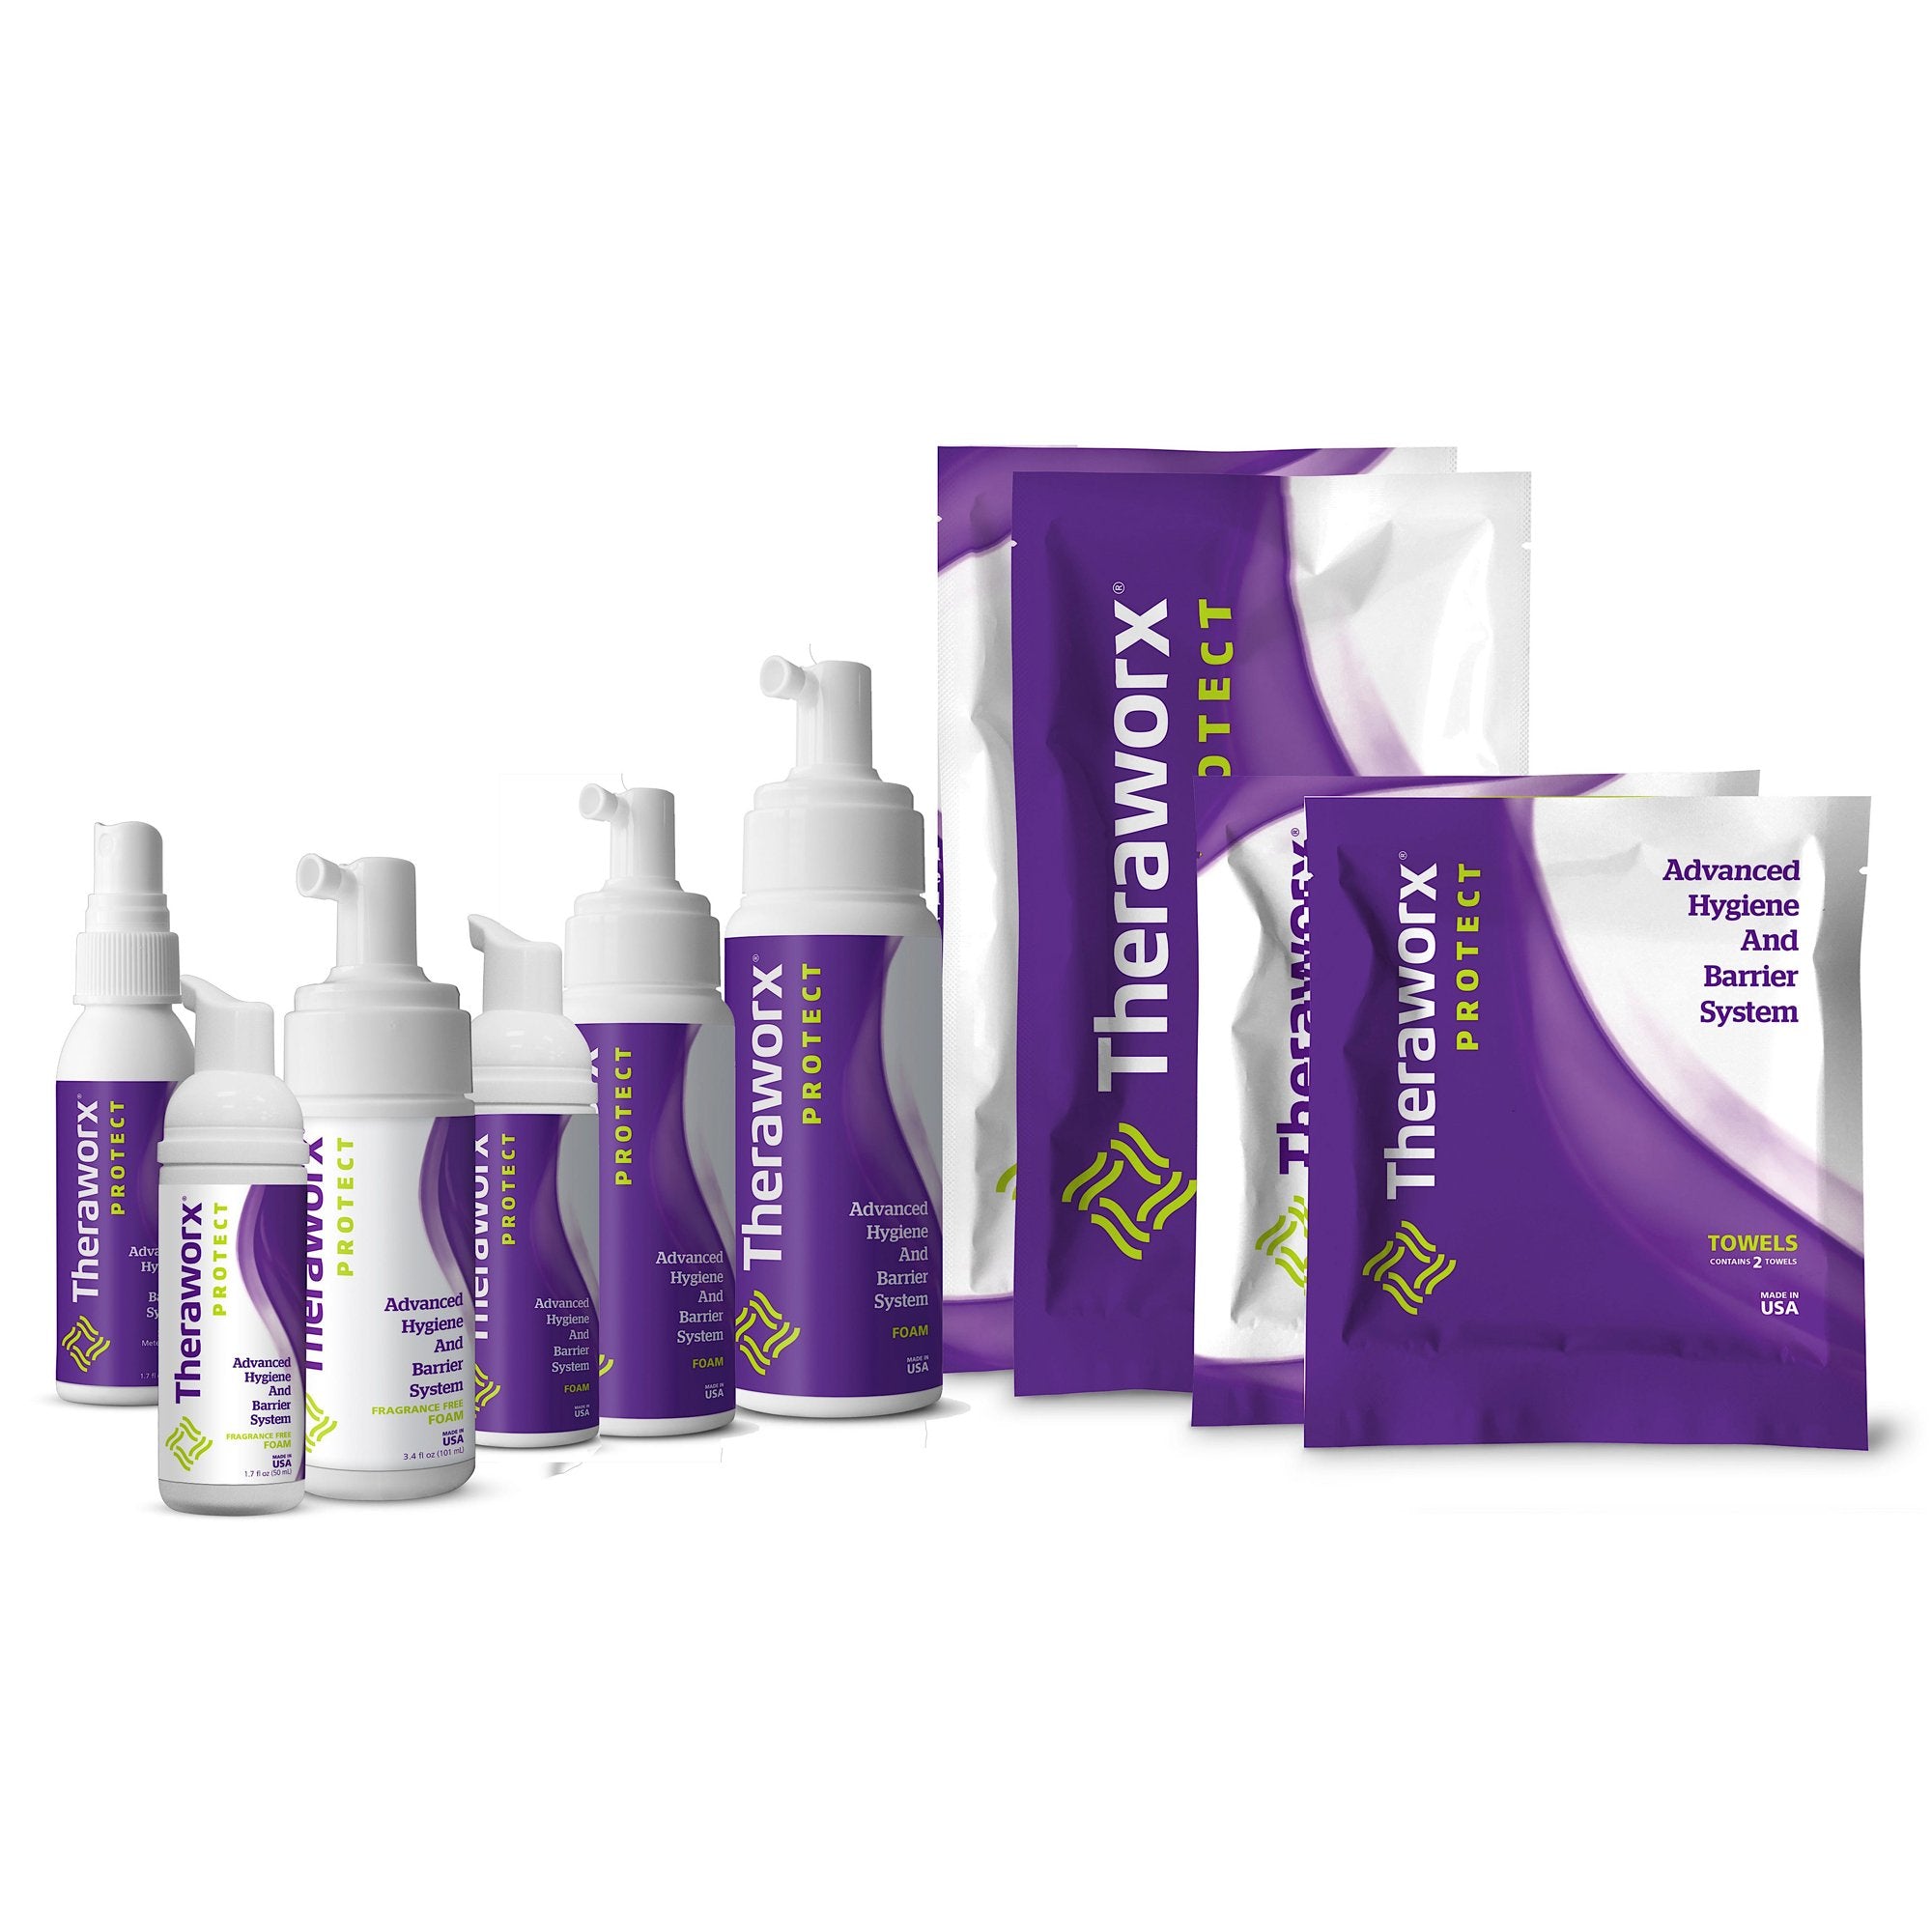 Rinse-Free Cleanser Theraworx® Protect Advanced Hygiene and Barrier System Foaming 7.1 oz. Pump Bottle Lavender Scent